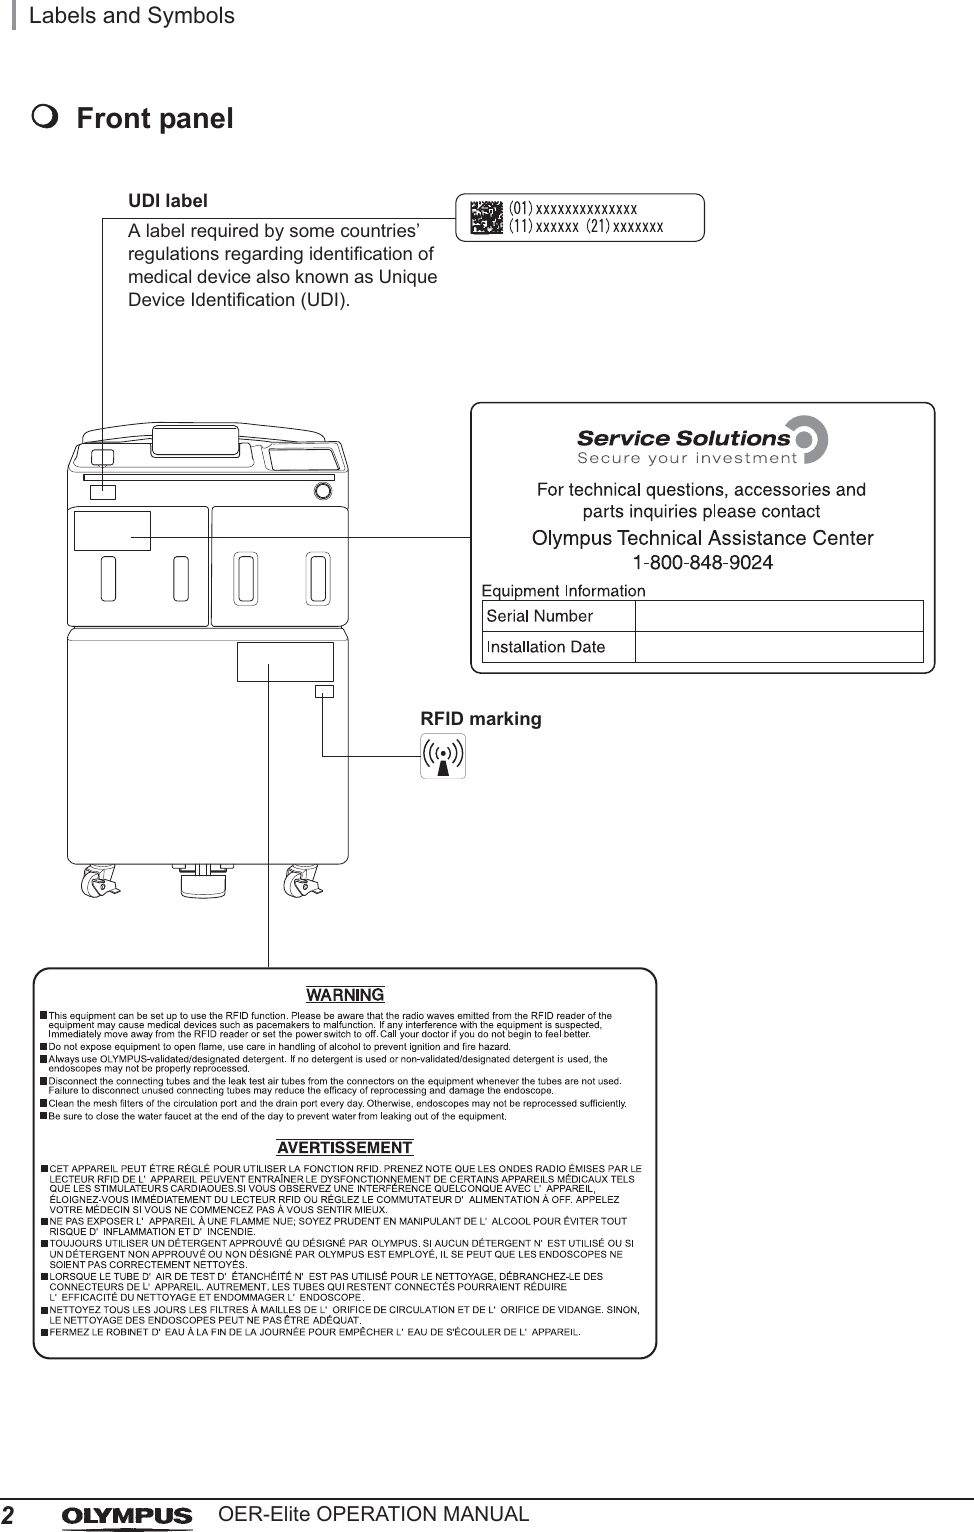 2Labels and SymbolsOER-Elite OPERATION MANUALFront panelRFID markingUDI labelA label required by some countries’ regulations regarding identification of medical device also known as Unique Device Identification (UDI).